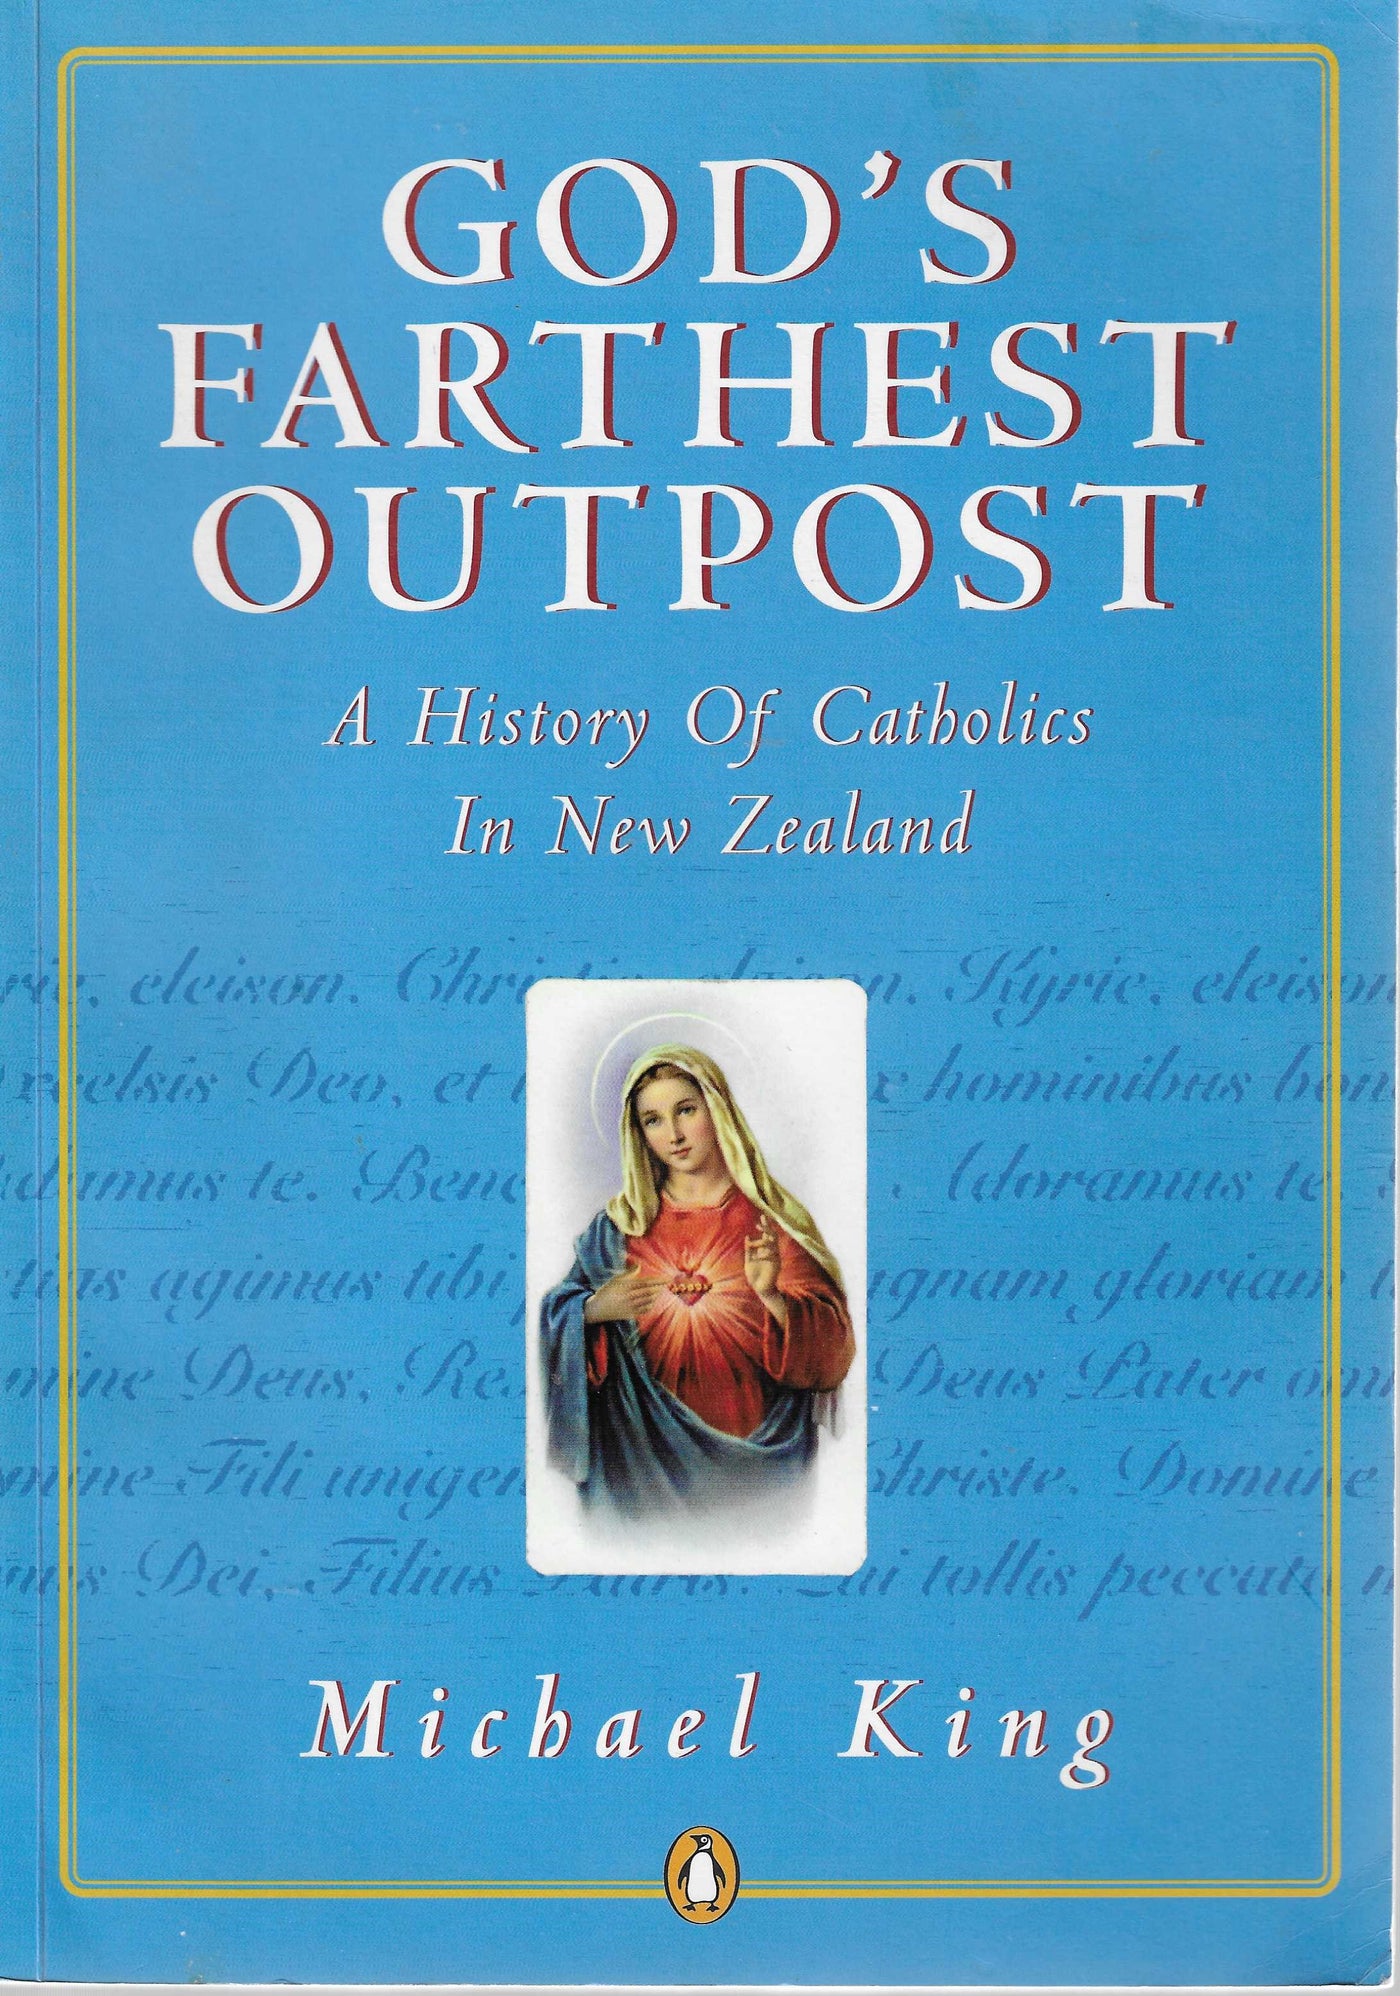 God's Farthest Outpost: A History of Catholics in New Zealand